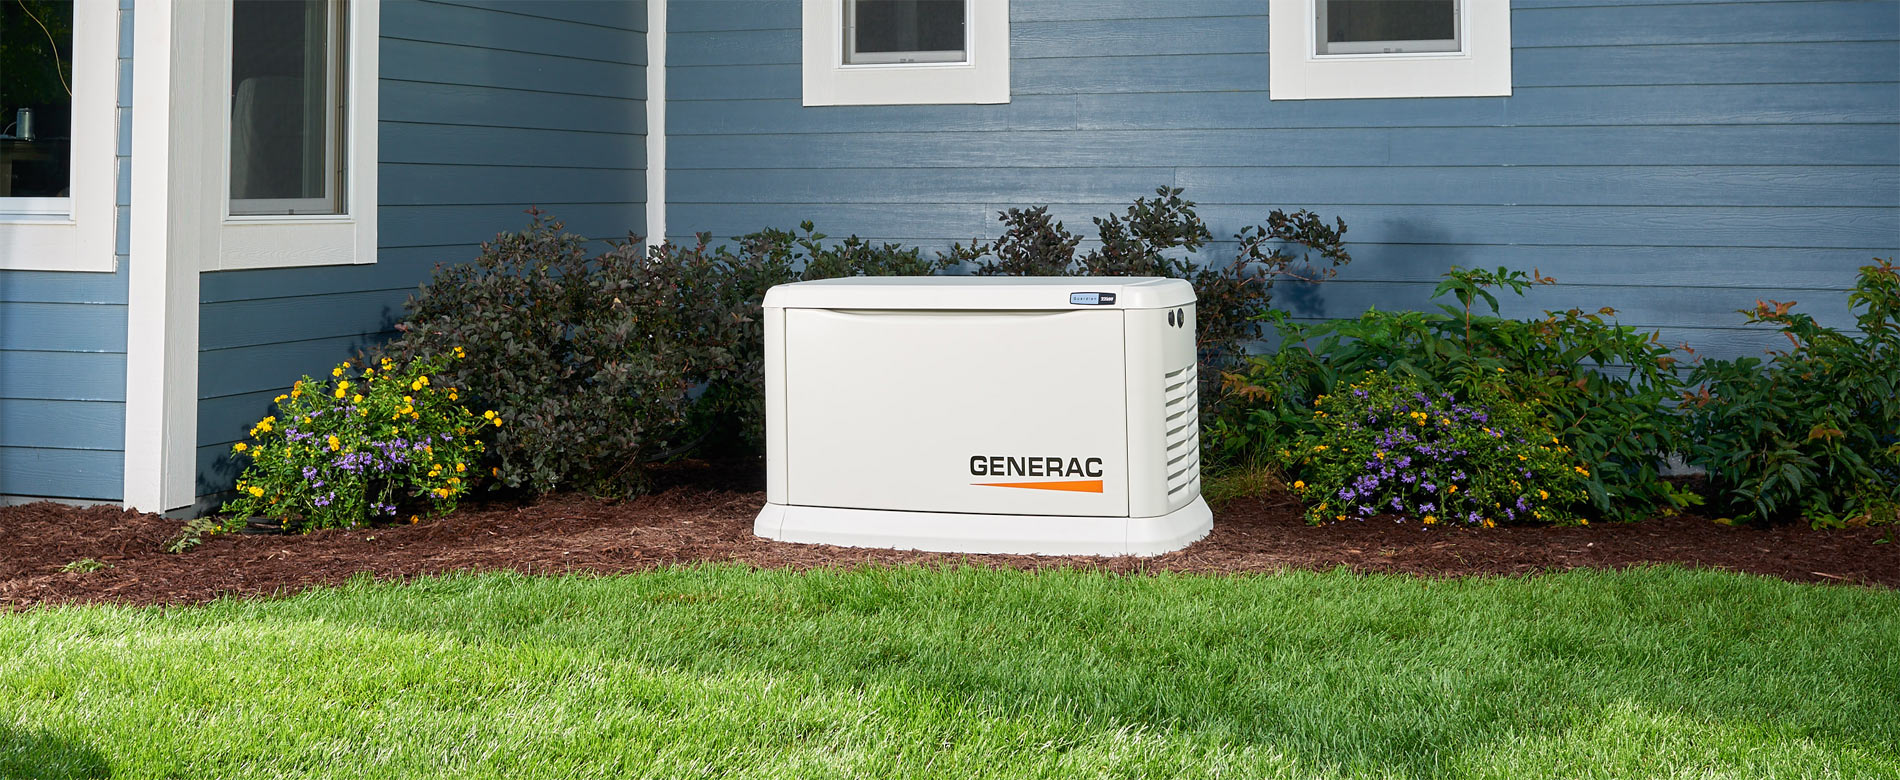 Ronaldson Electrical Construction | Residential Generators in Moorestown NJ 08057